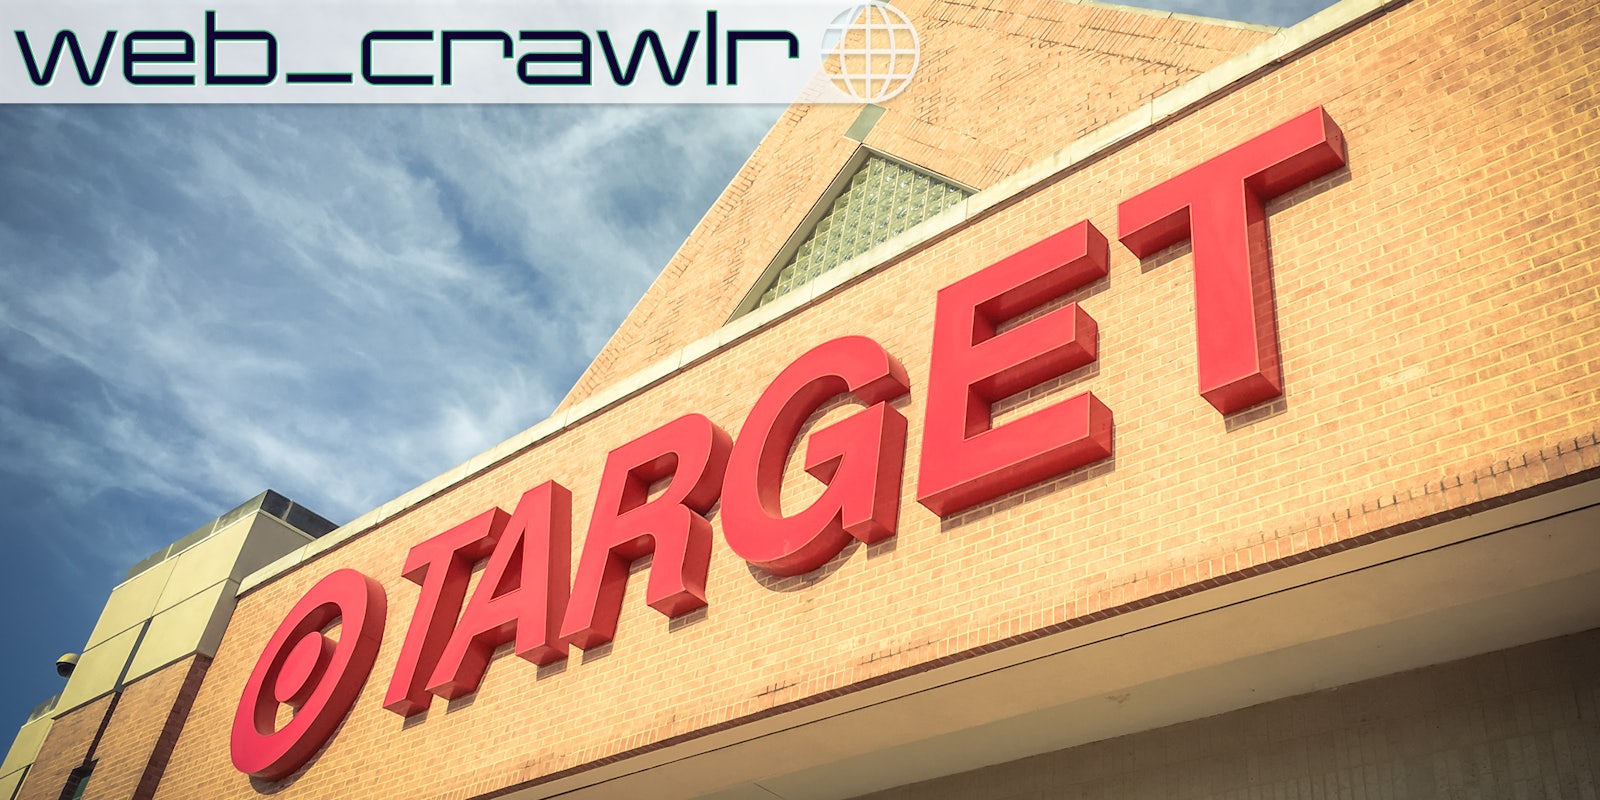 A Target store. The Daily Dot newsletter web_crawlr logo is in the top left corner.